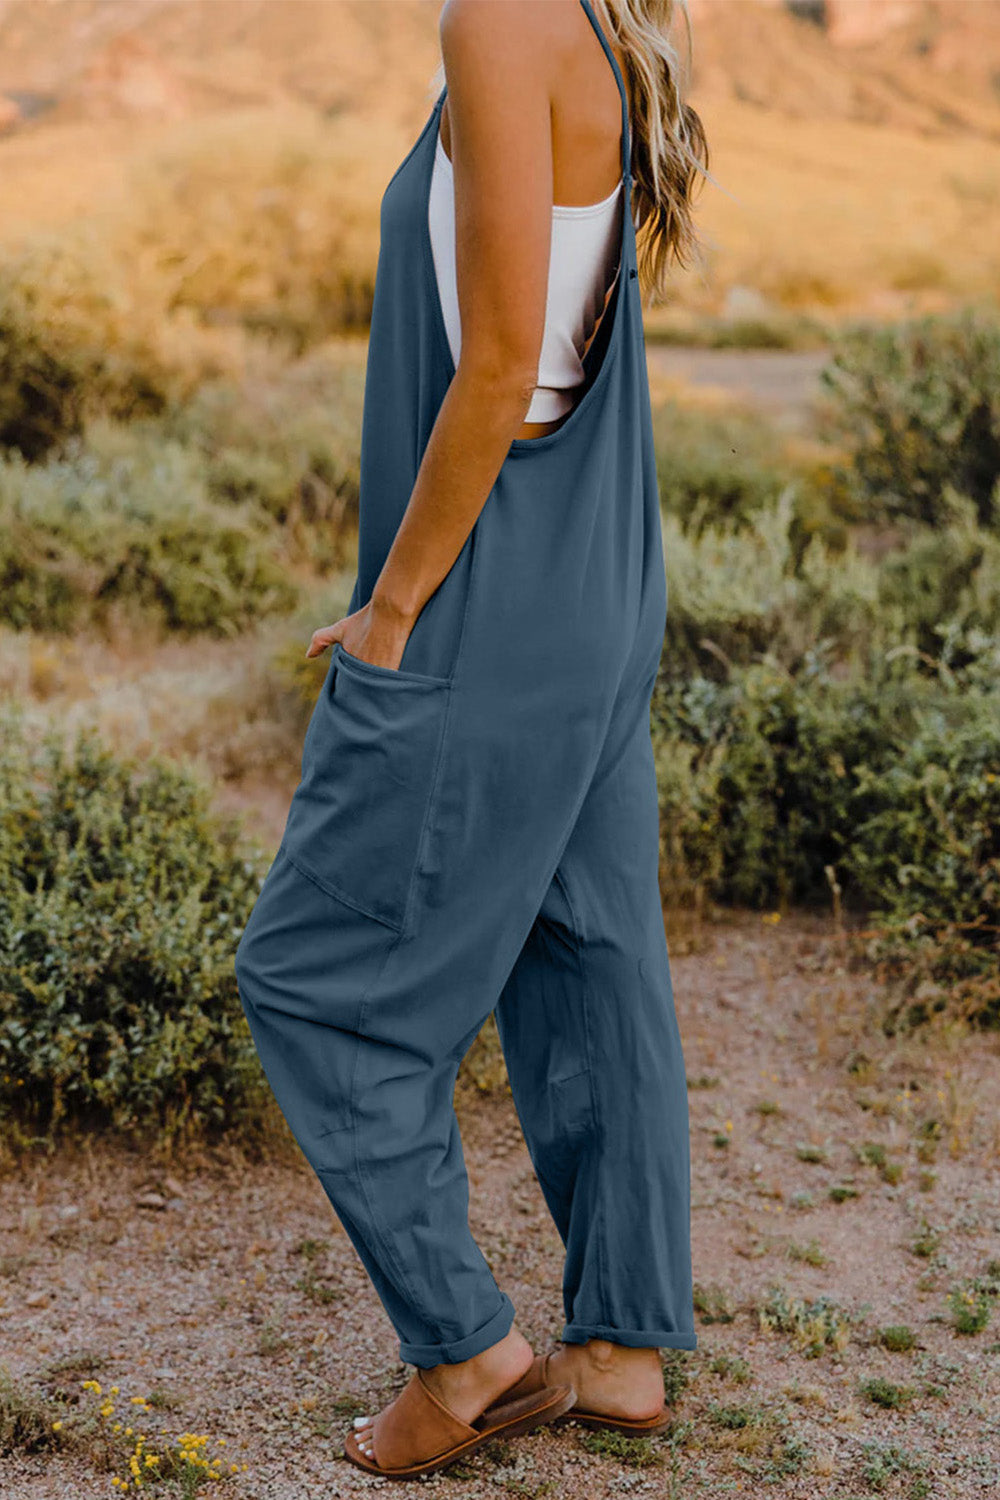 Sydney V-Neck Sleeveless Jumpsuit with Pocket - Coco and lulu boutique 